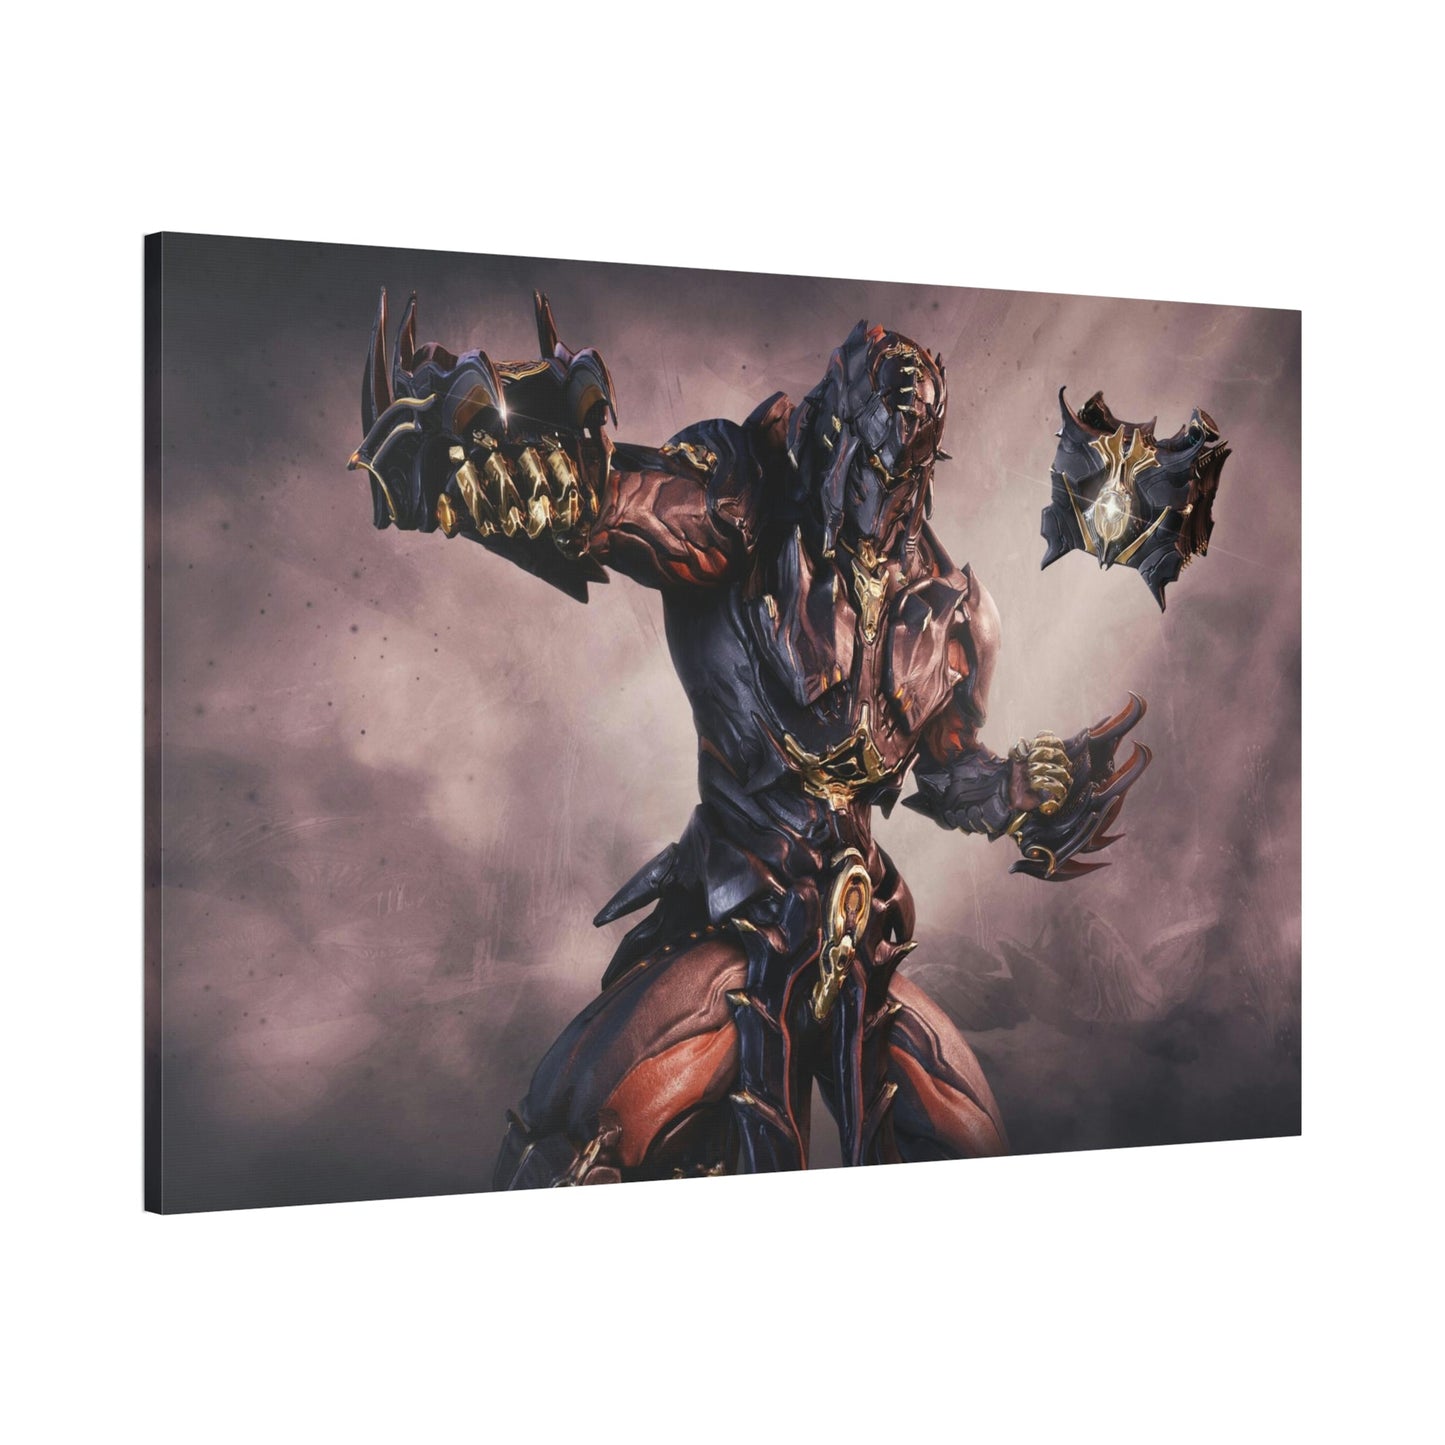 The Warframe Collection: Stunning Wall Art for Gamers and Art Lovers